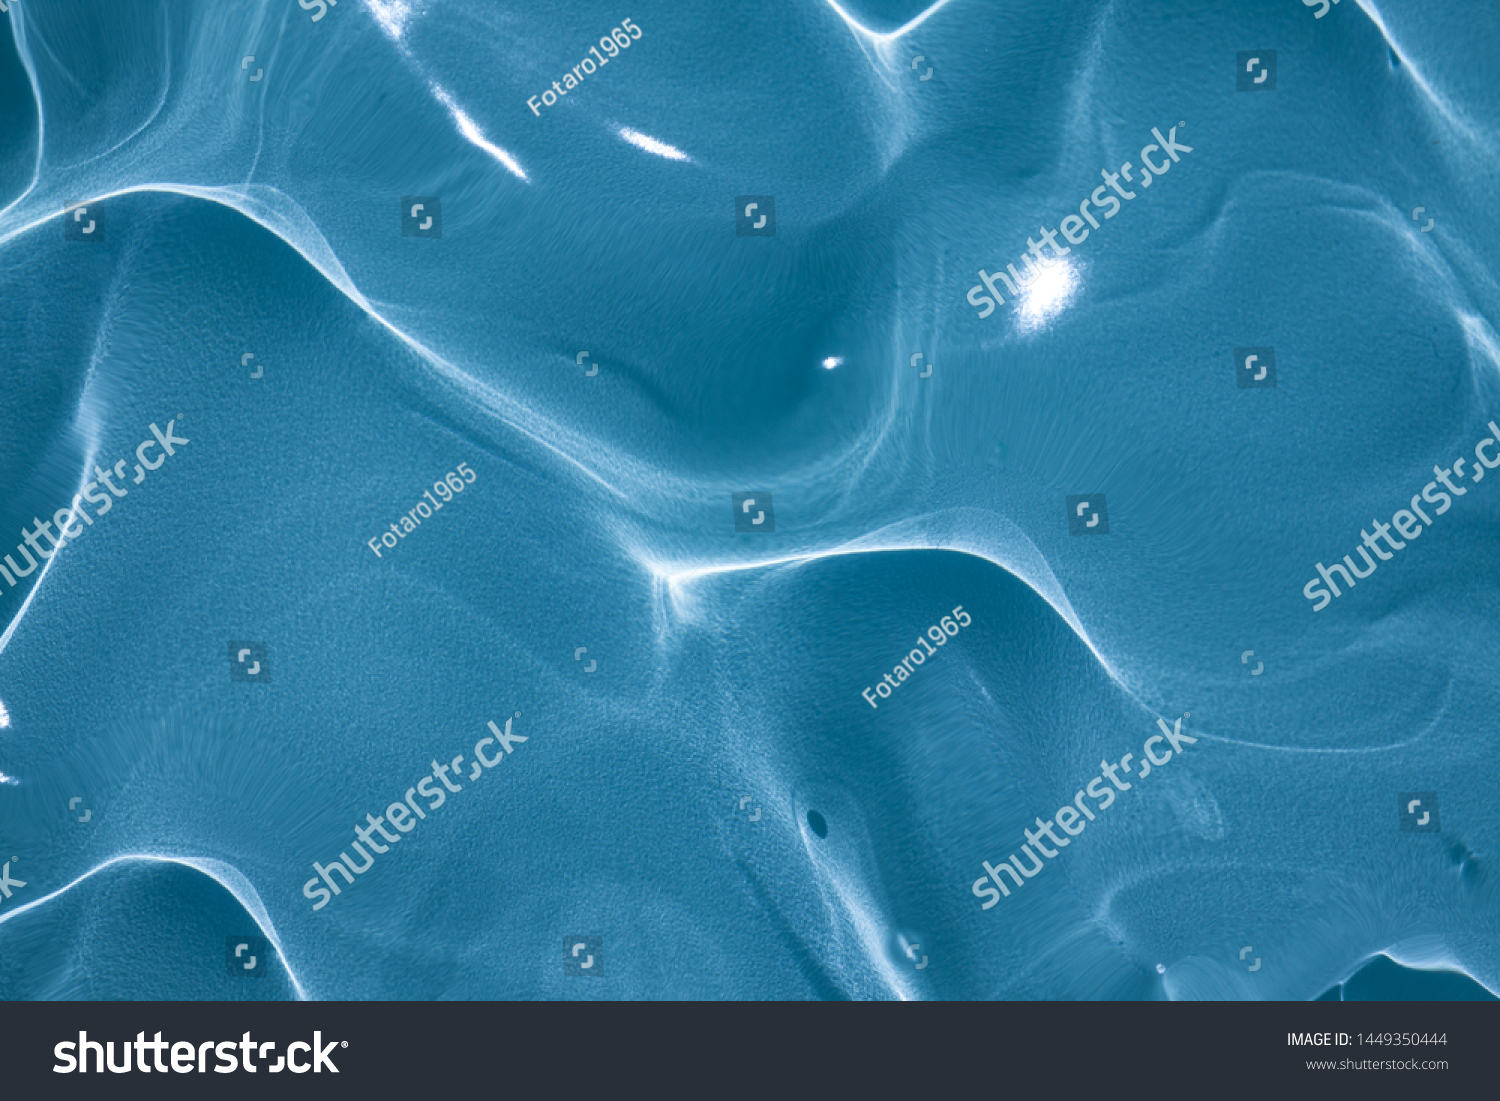 58,674 Blue lotion Stock Photos, Images & Photography | Shutterstock